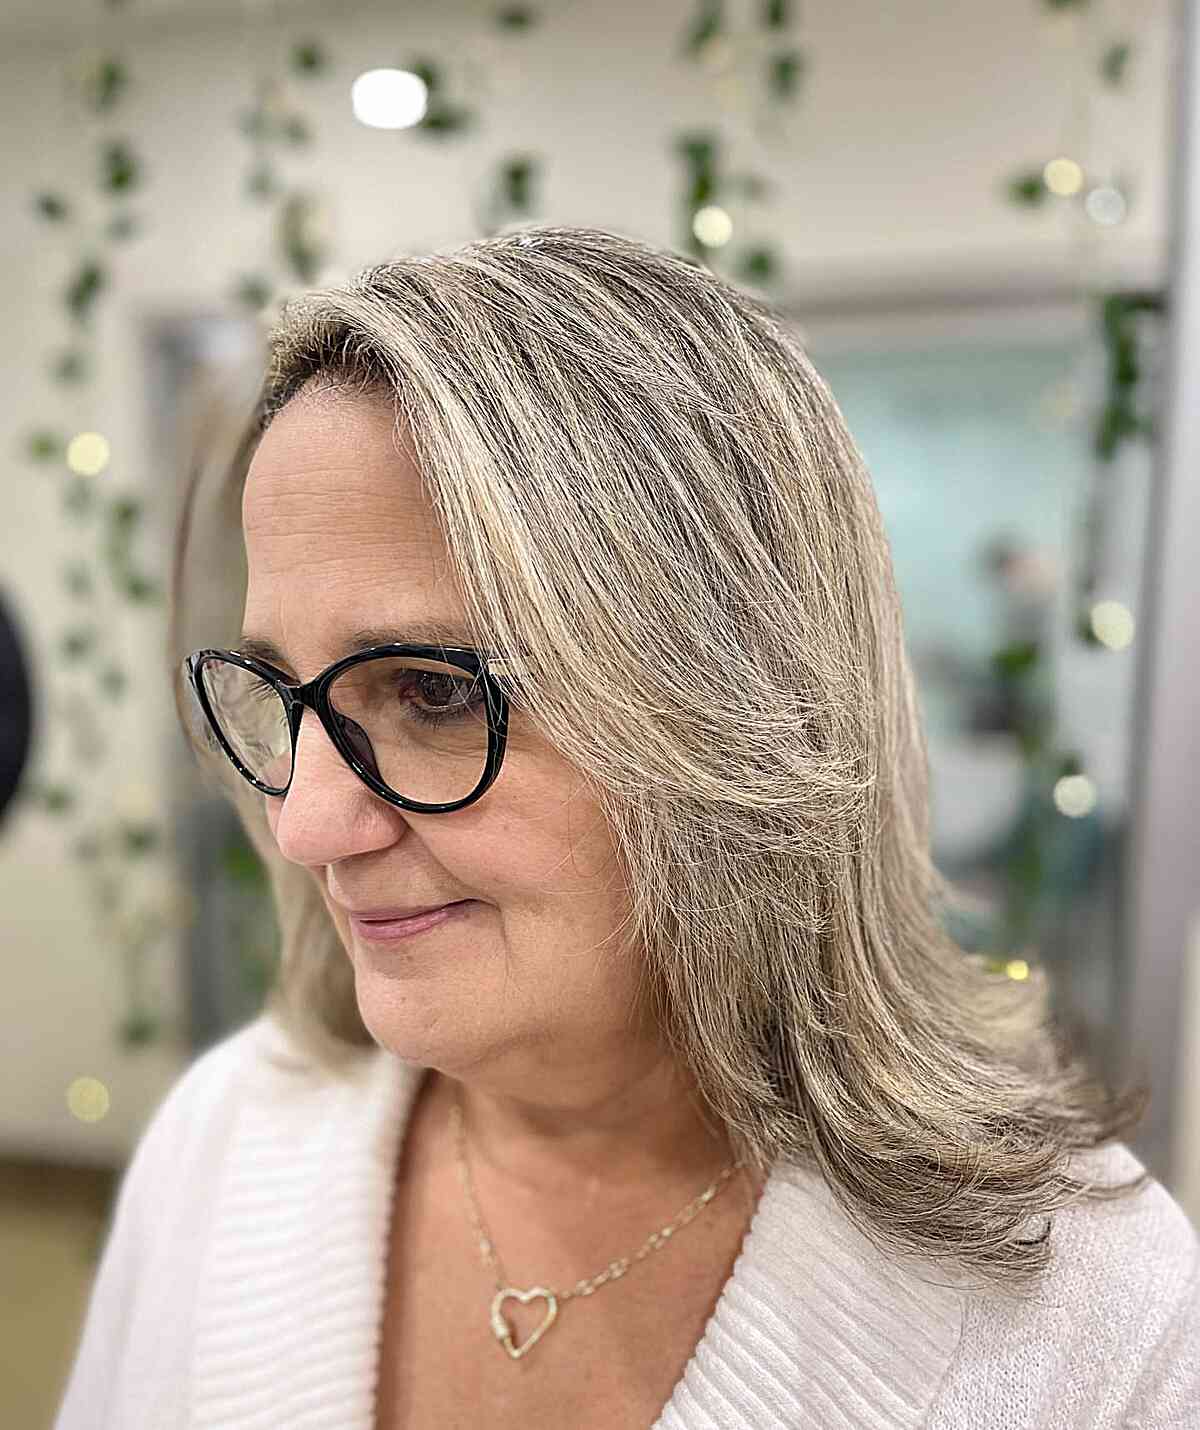 Babylights on a Mid-Length Cut for Women Aged 60 with Specs